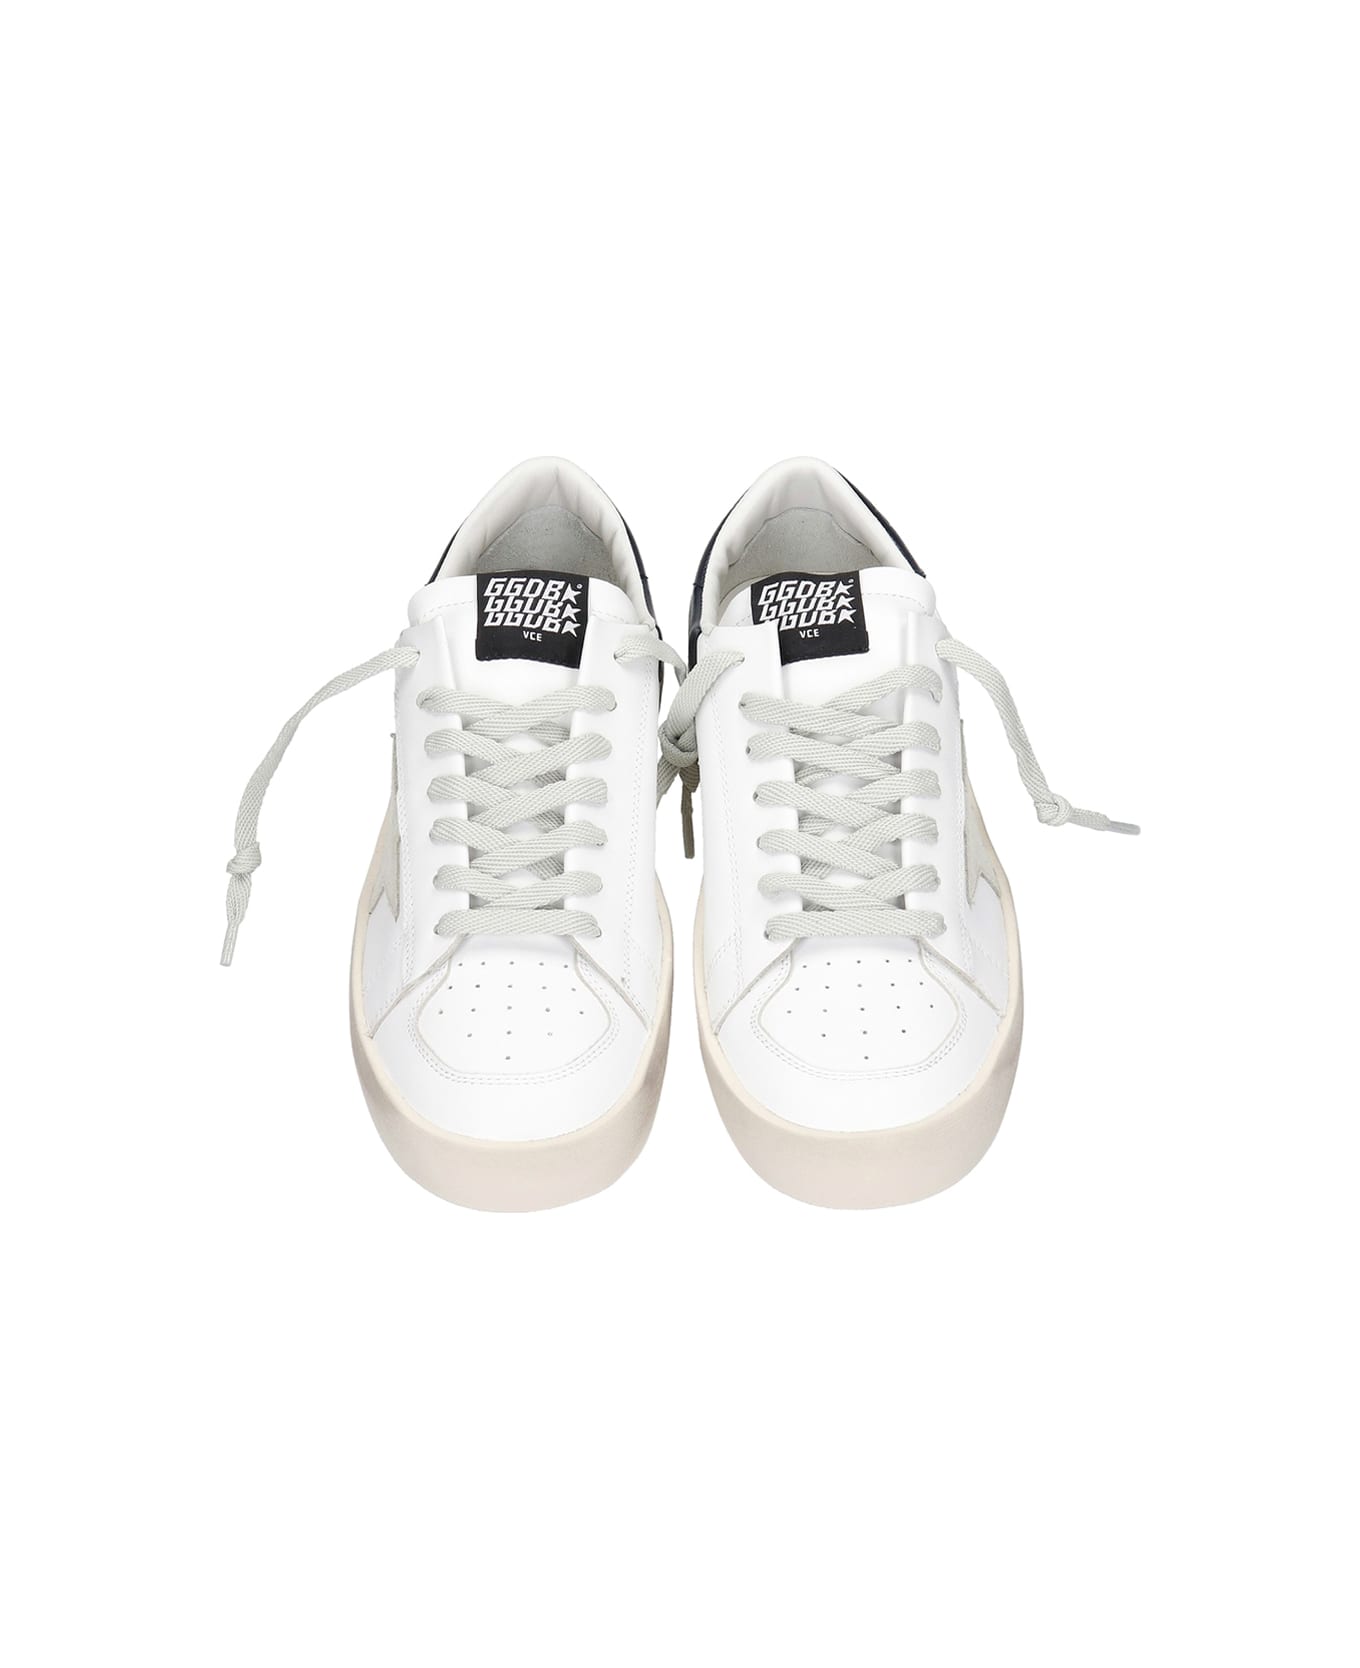 Golden Goose Stardan Leather Upper Suede Star Sneakers - White Ice Blue スニーカー